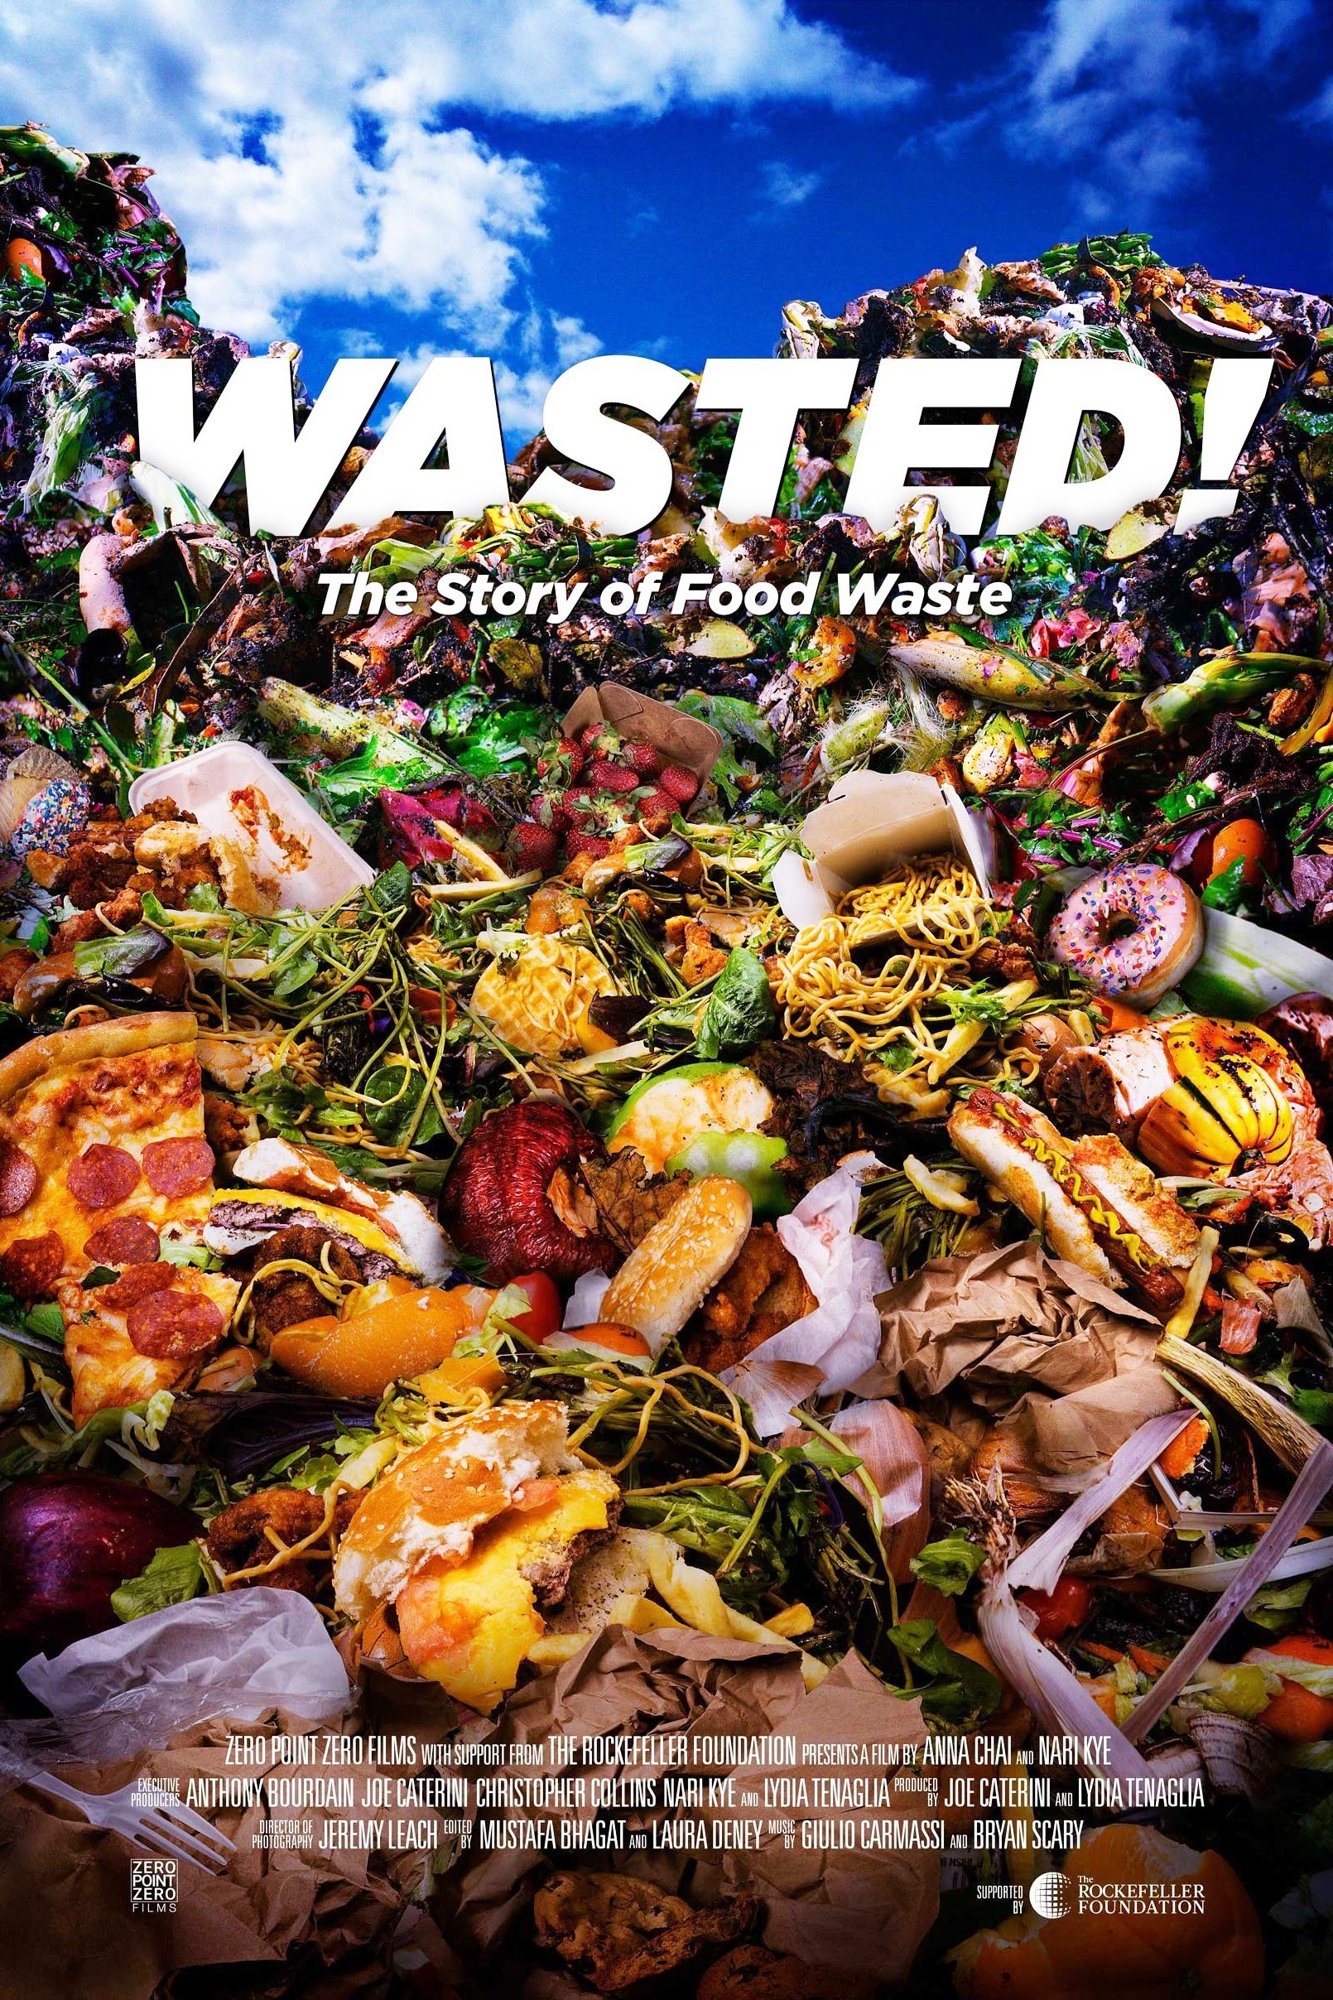 WASTED! THE STORY OF FOOD WASTE at Aero Theatre